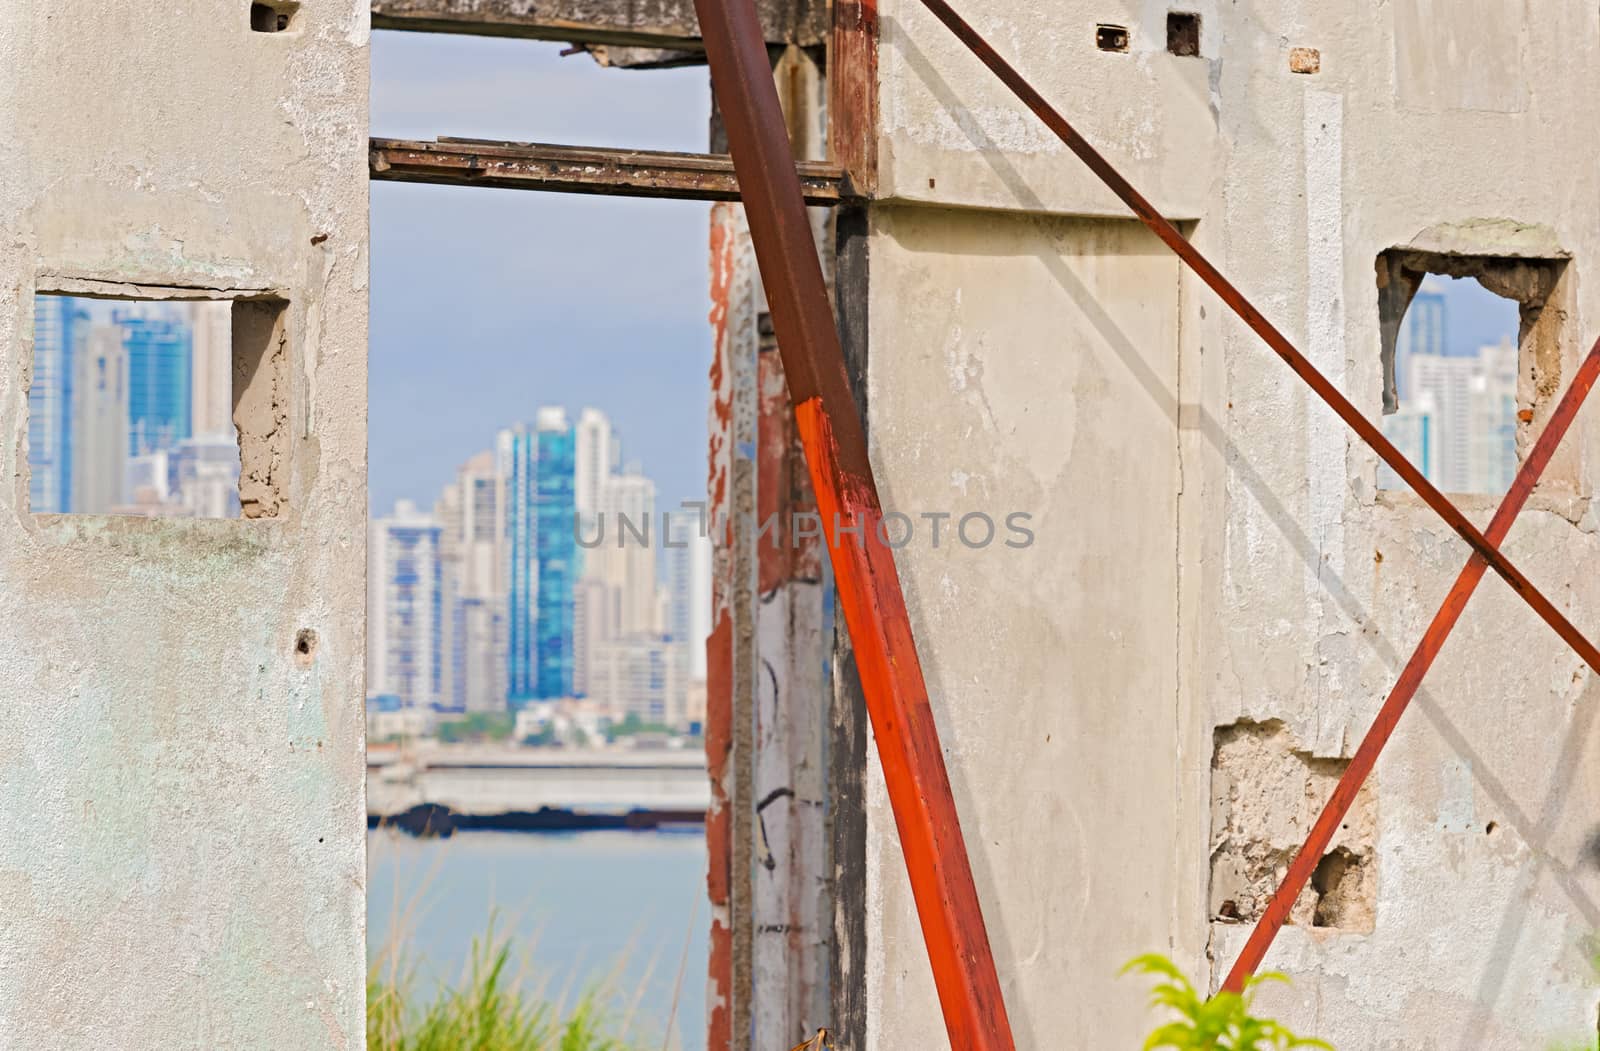 Old ruined houses, Panama City by Marcus